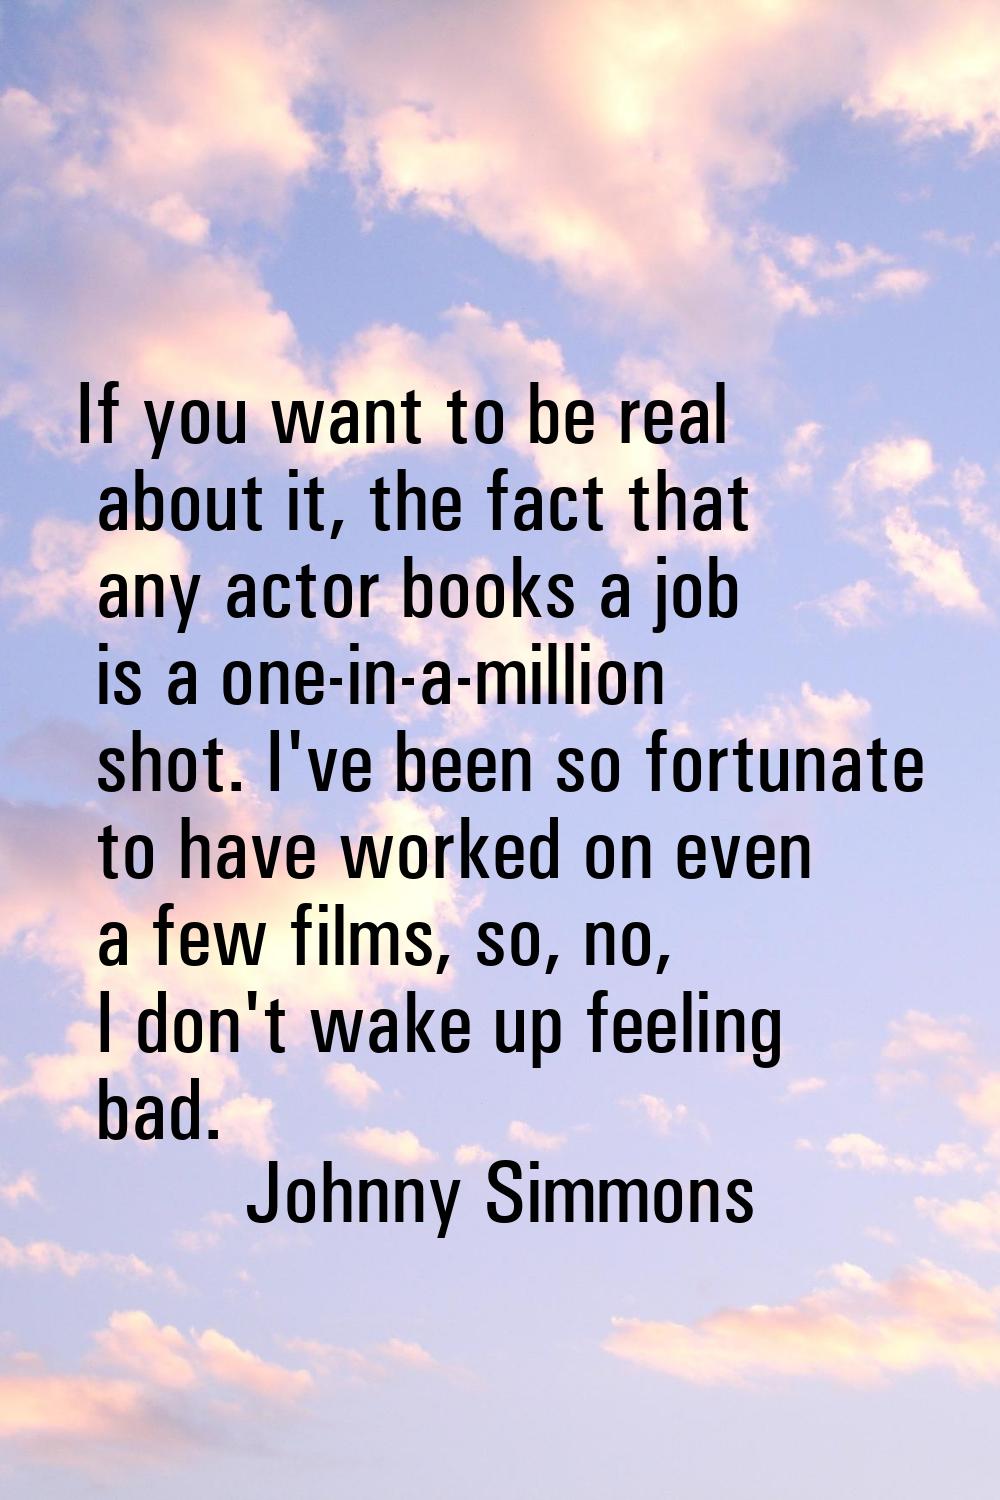 If you want to be real about it, the fact that any actor books a job is a one-in-a-million shot. I'